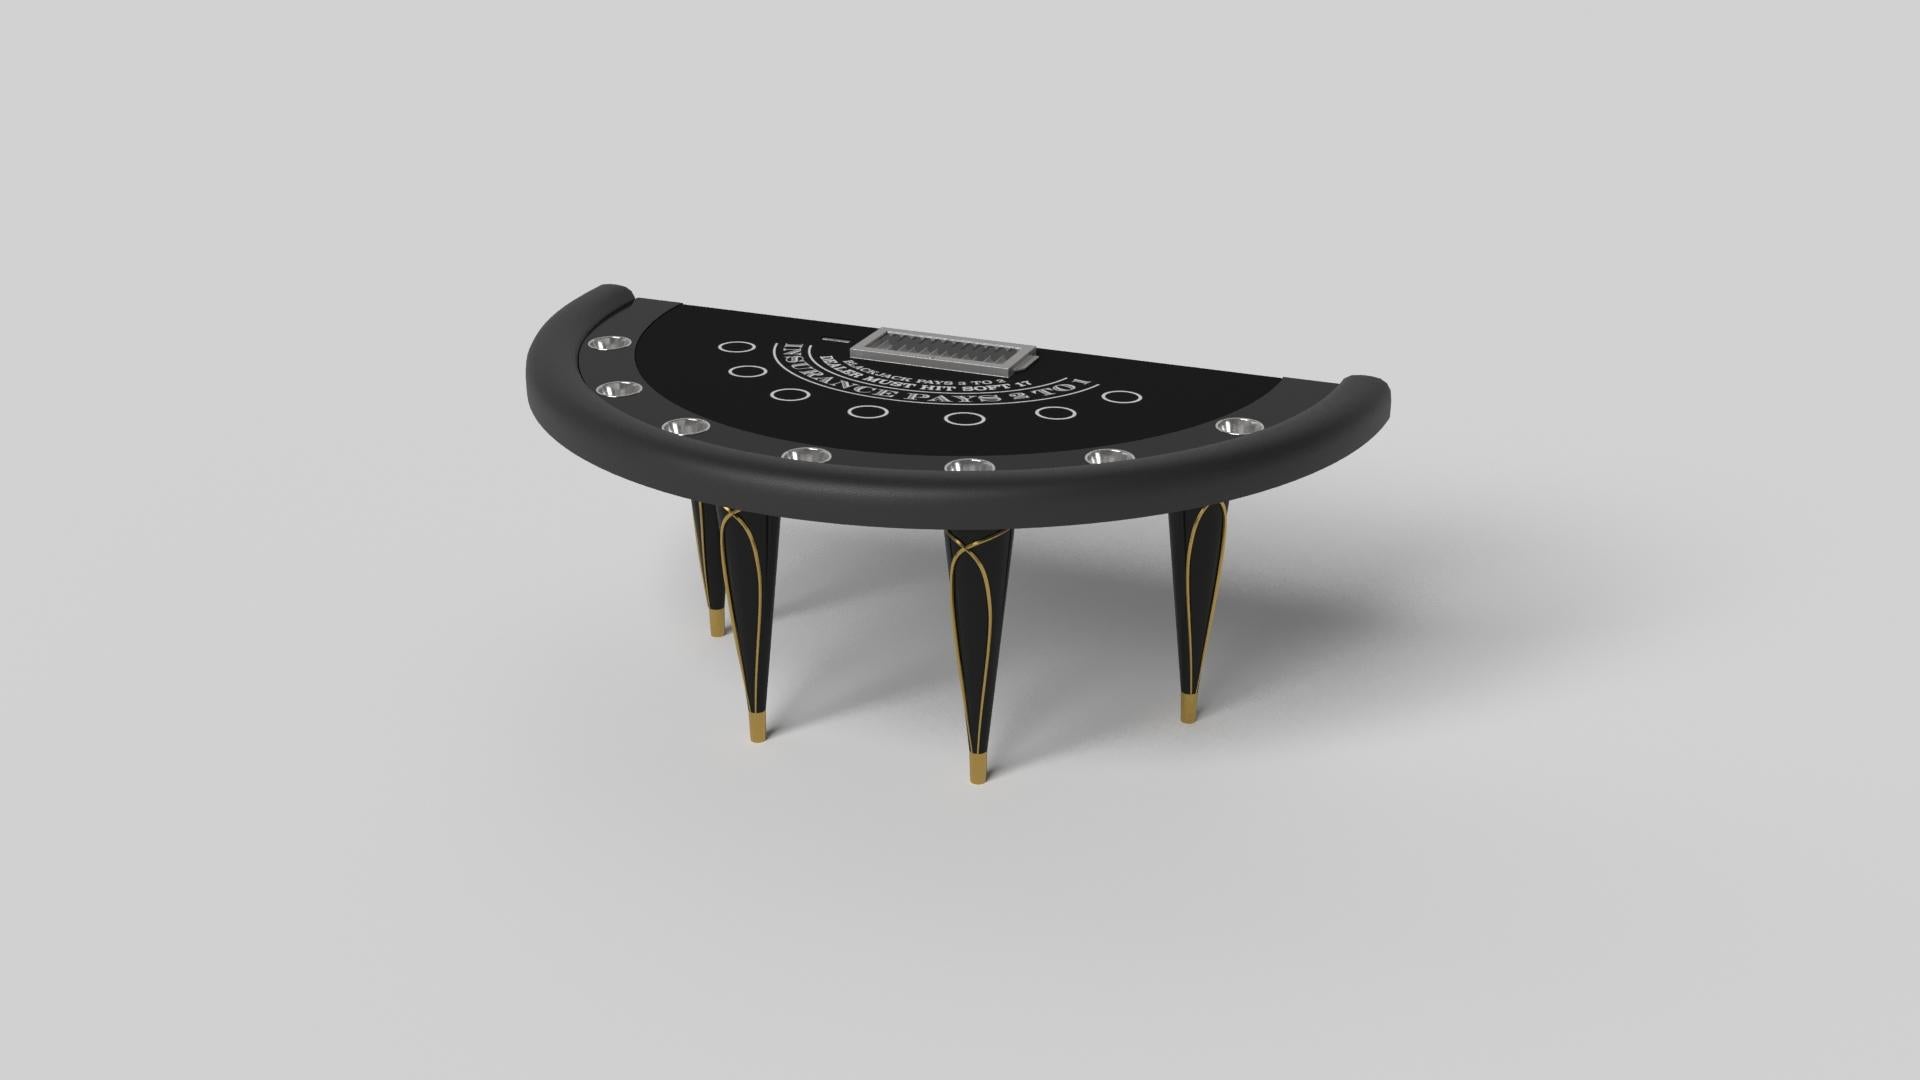 Champagne gold accents add undeniable elegance to this luxury blackjack table. Offering superior playability and uncompromised style, this design features hand carved details, decorative metal elements, and metal sabots at the bottom of each leg.